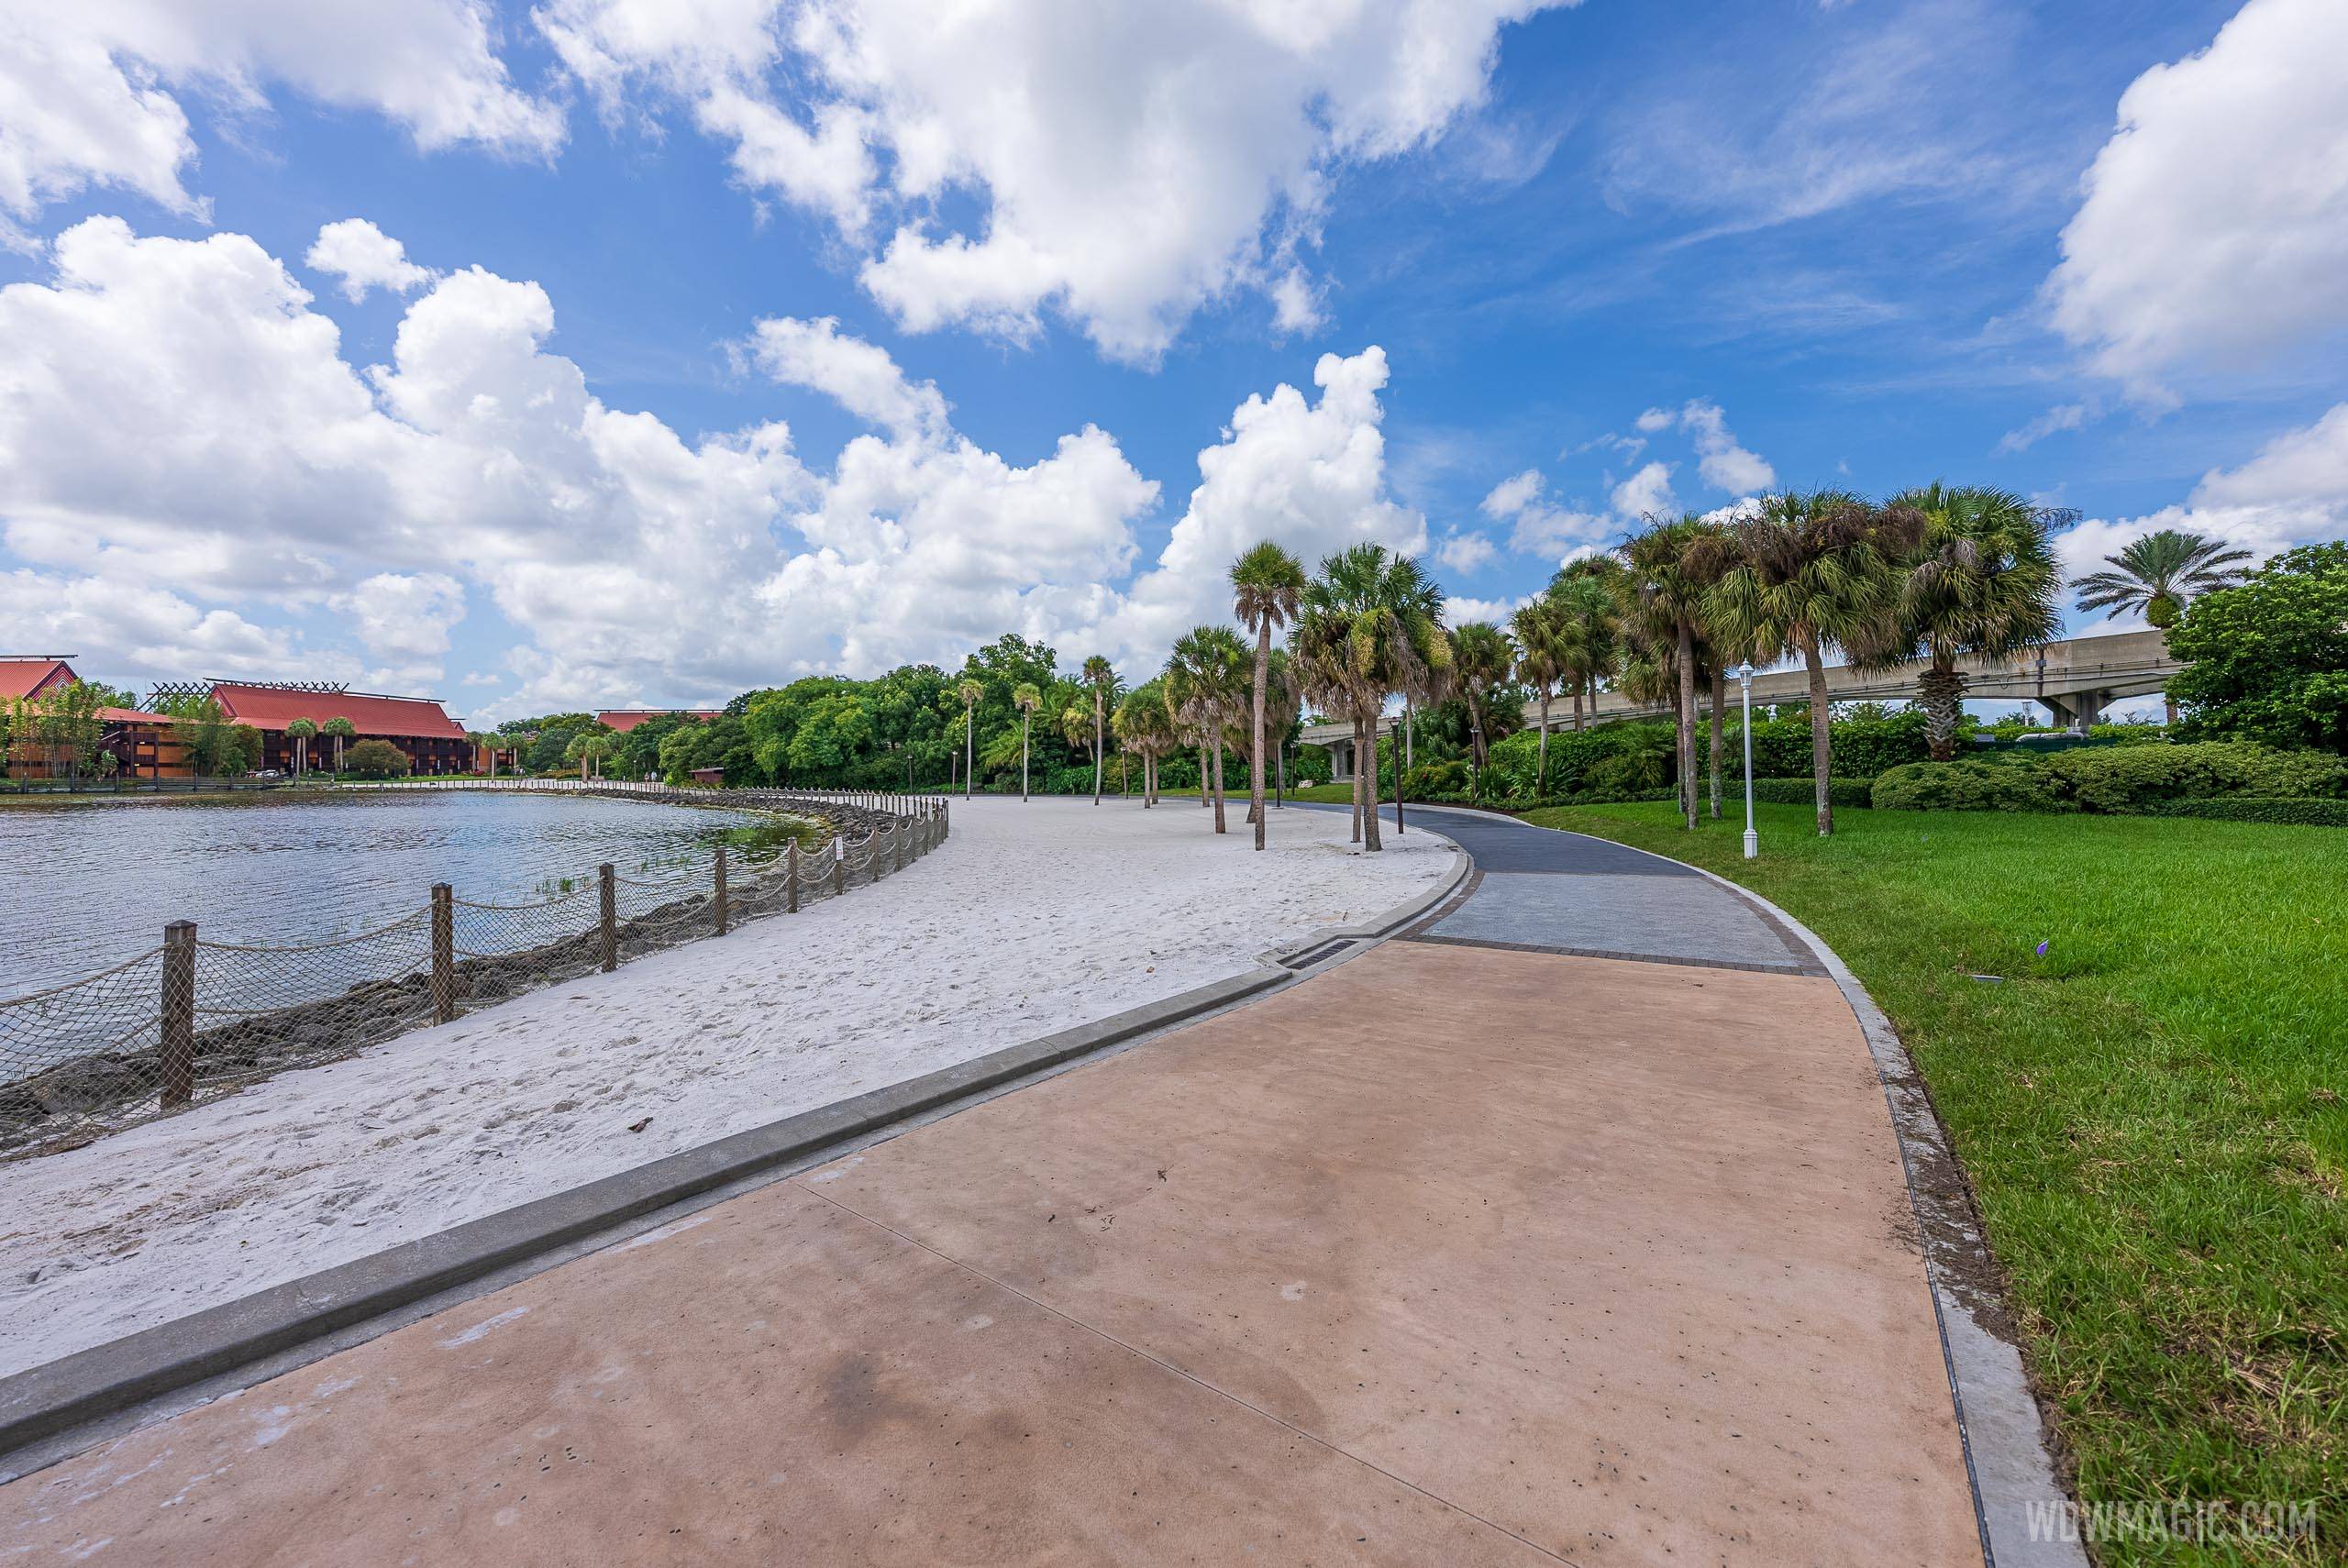 Polynesian Resort to Grand Floridian Walkway reopened - July 13 2021